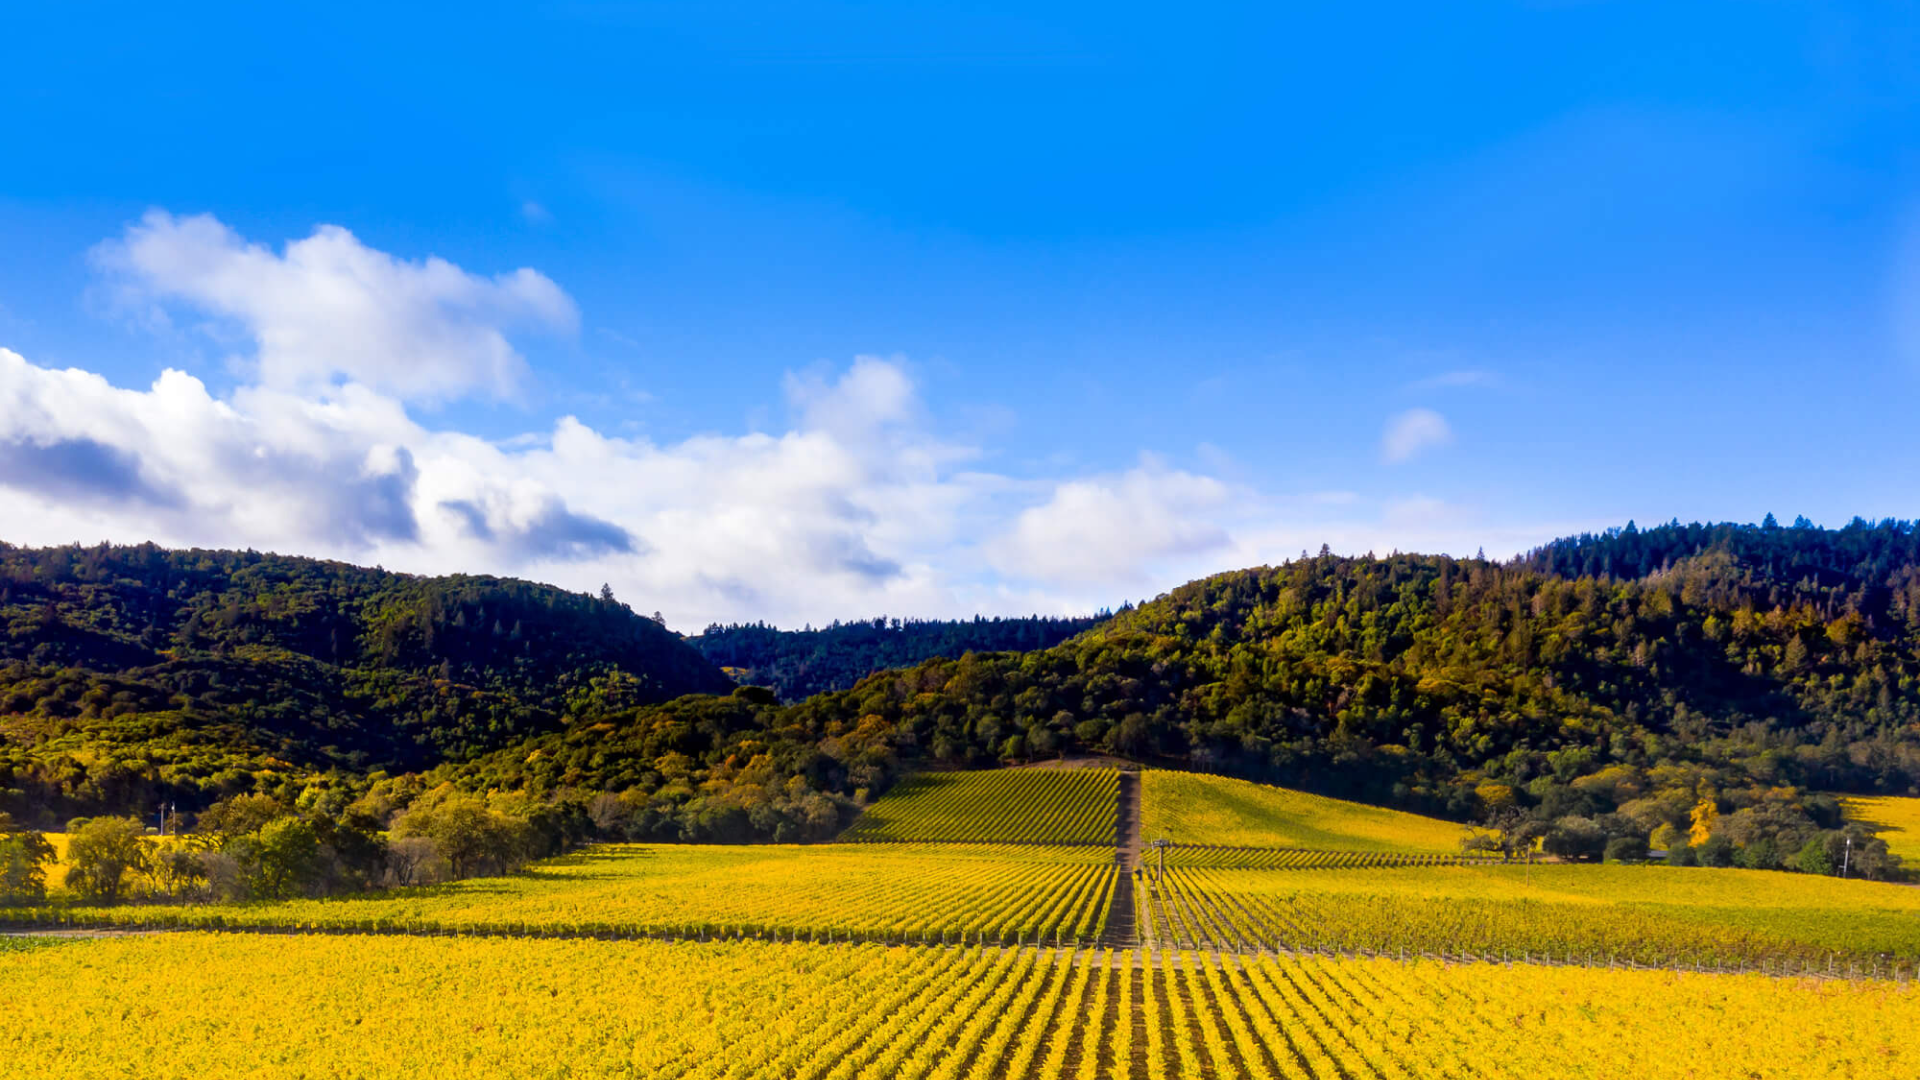 A vast vineyard stretches across rolling hills under a blue sky with scattered clouds. Rows of grapevines run parallel, and the landscape is lush with greenery.